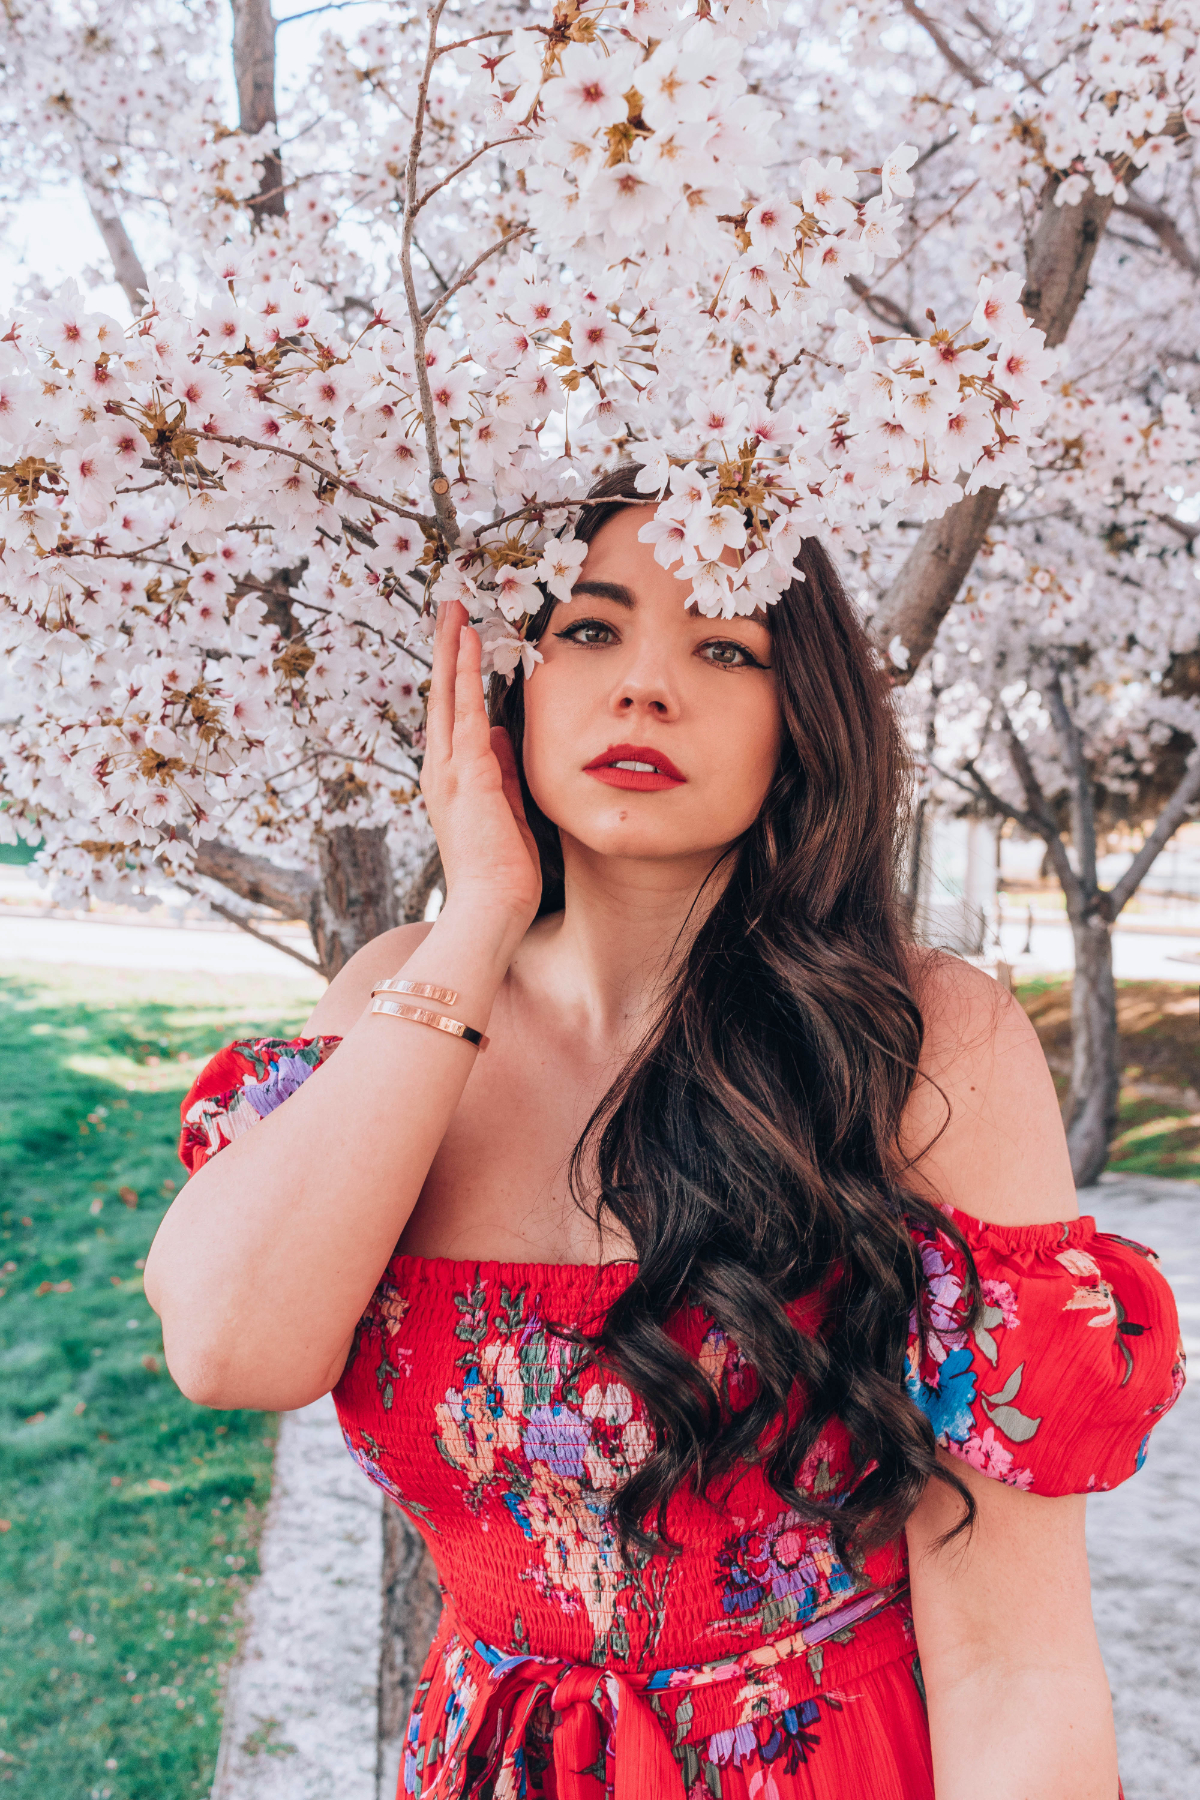 Lauryn Hock, style and travel blogger, has her hand near her face while standing under sakura cherry blossoms at the Utah State Capitol